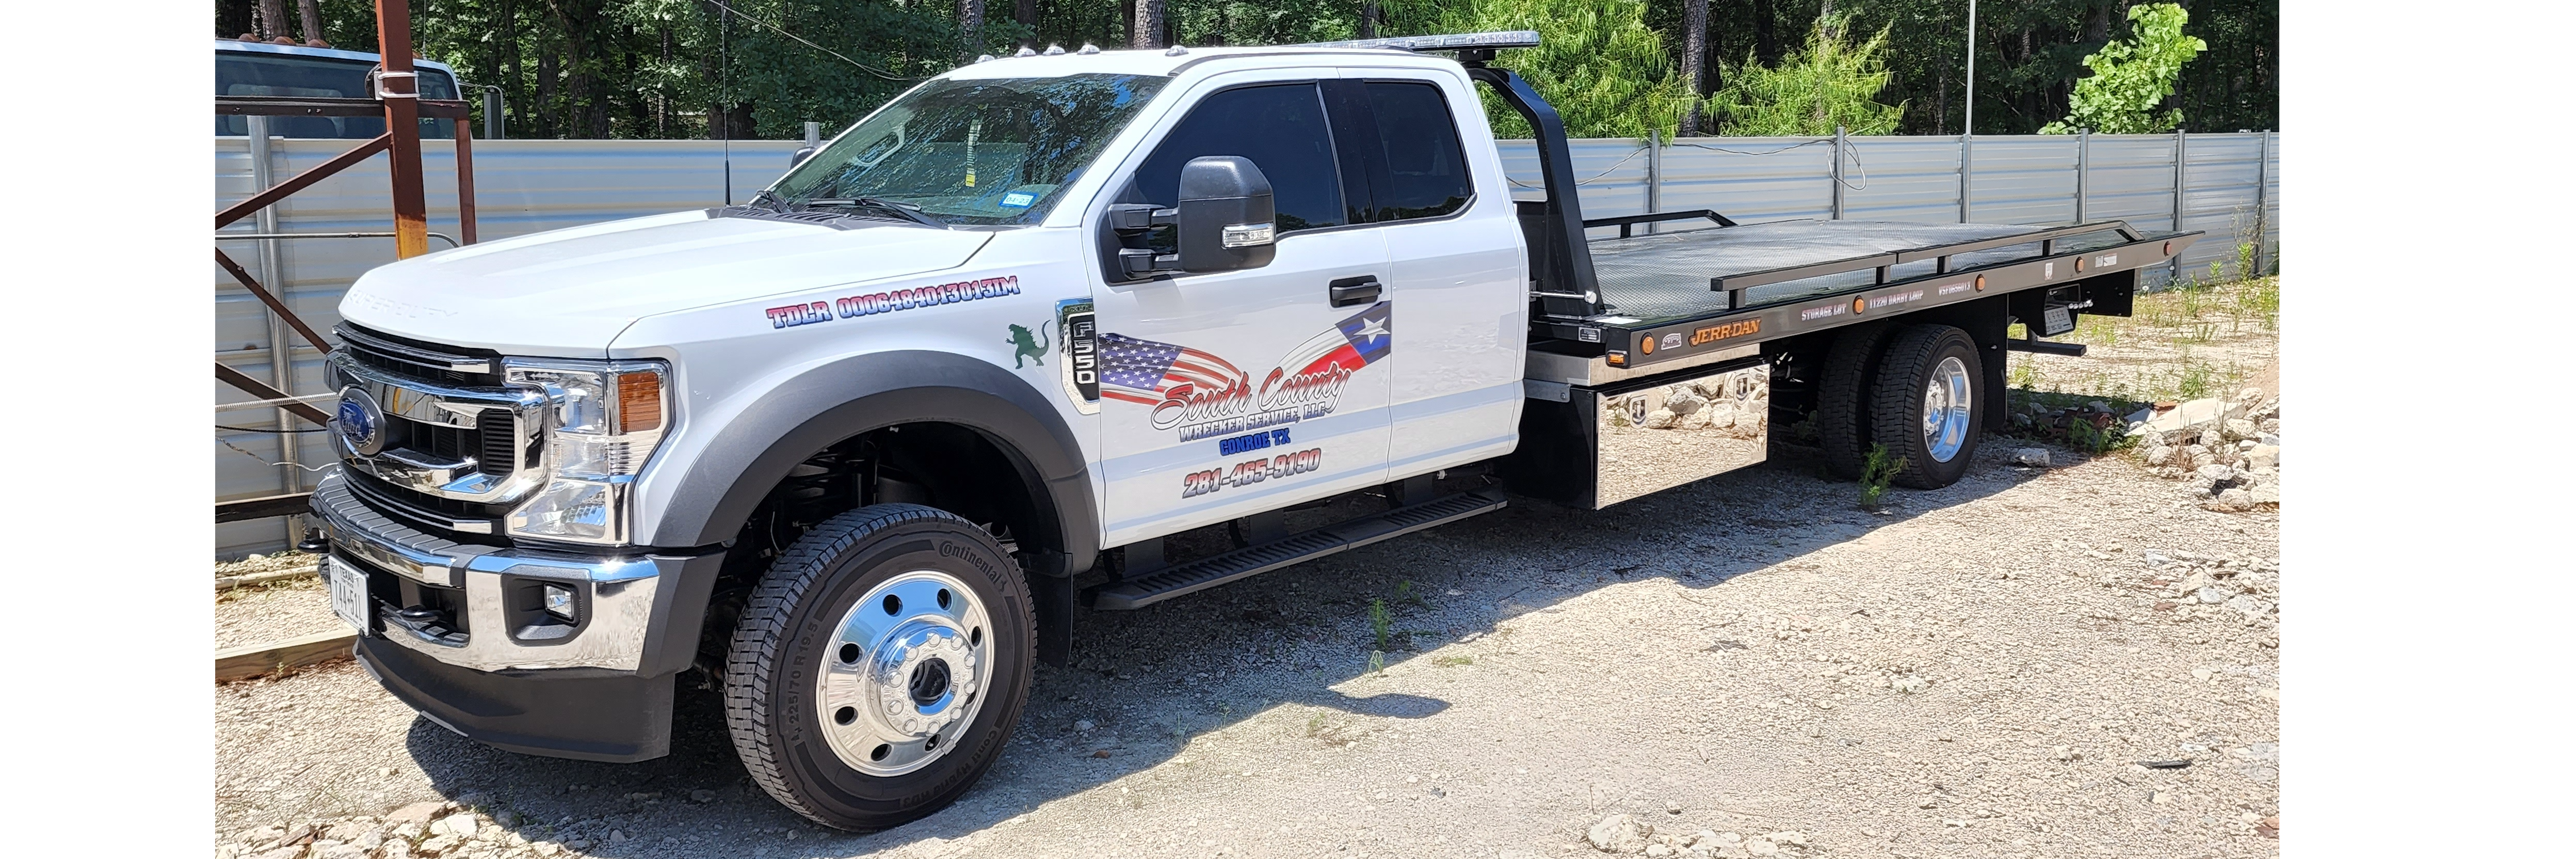 South County Wrecker. LLC Towing.com Profile Banner